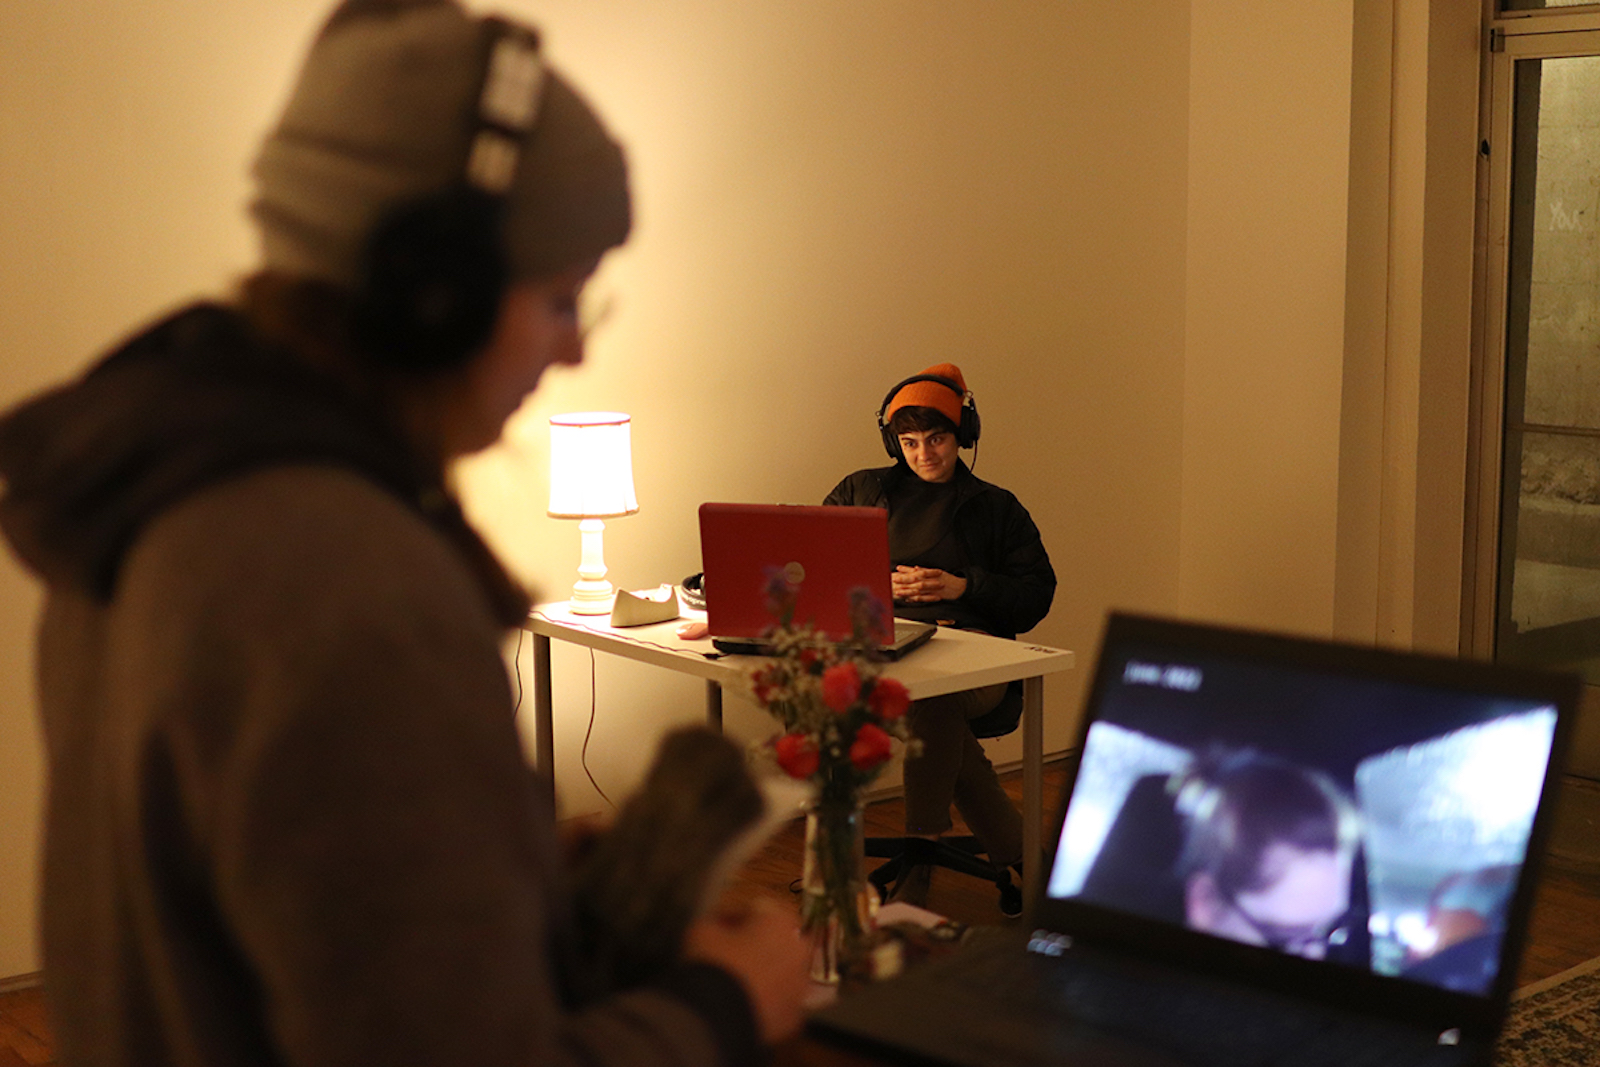 One person watches a video on a laptop while a person in the background watches on another laptop with headphones on